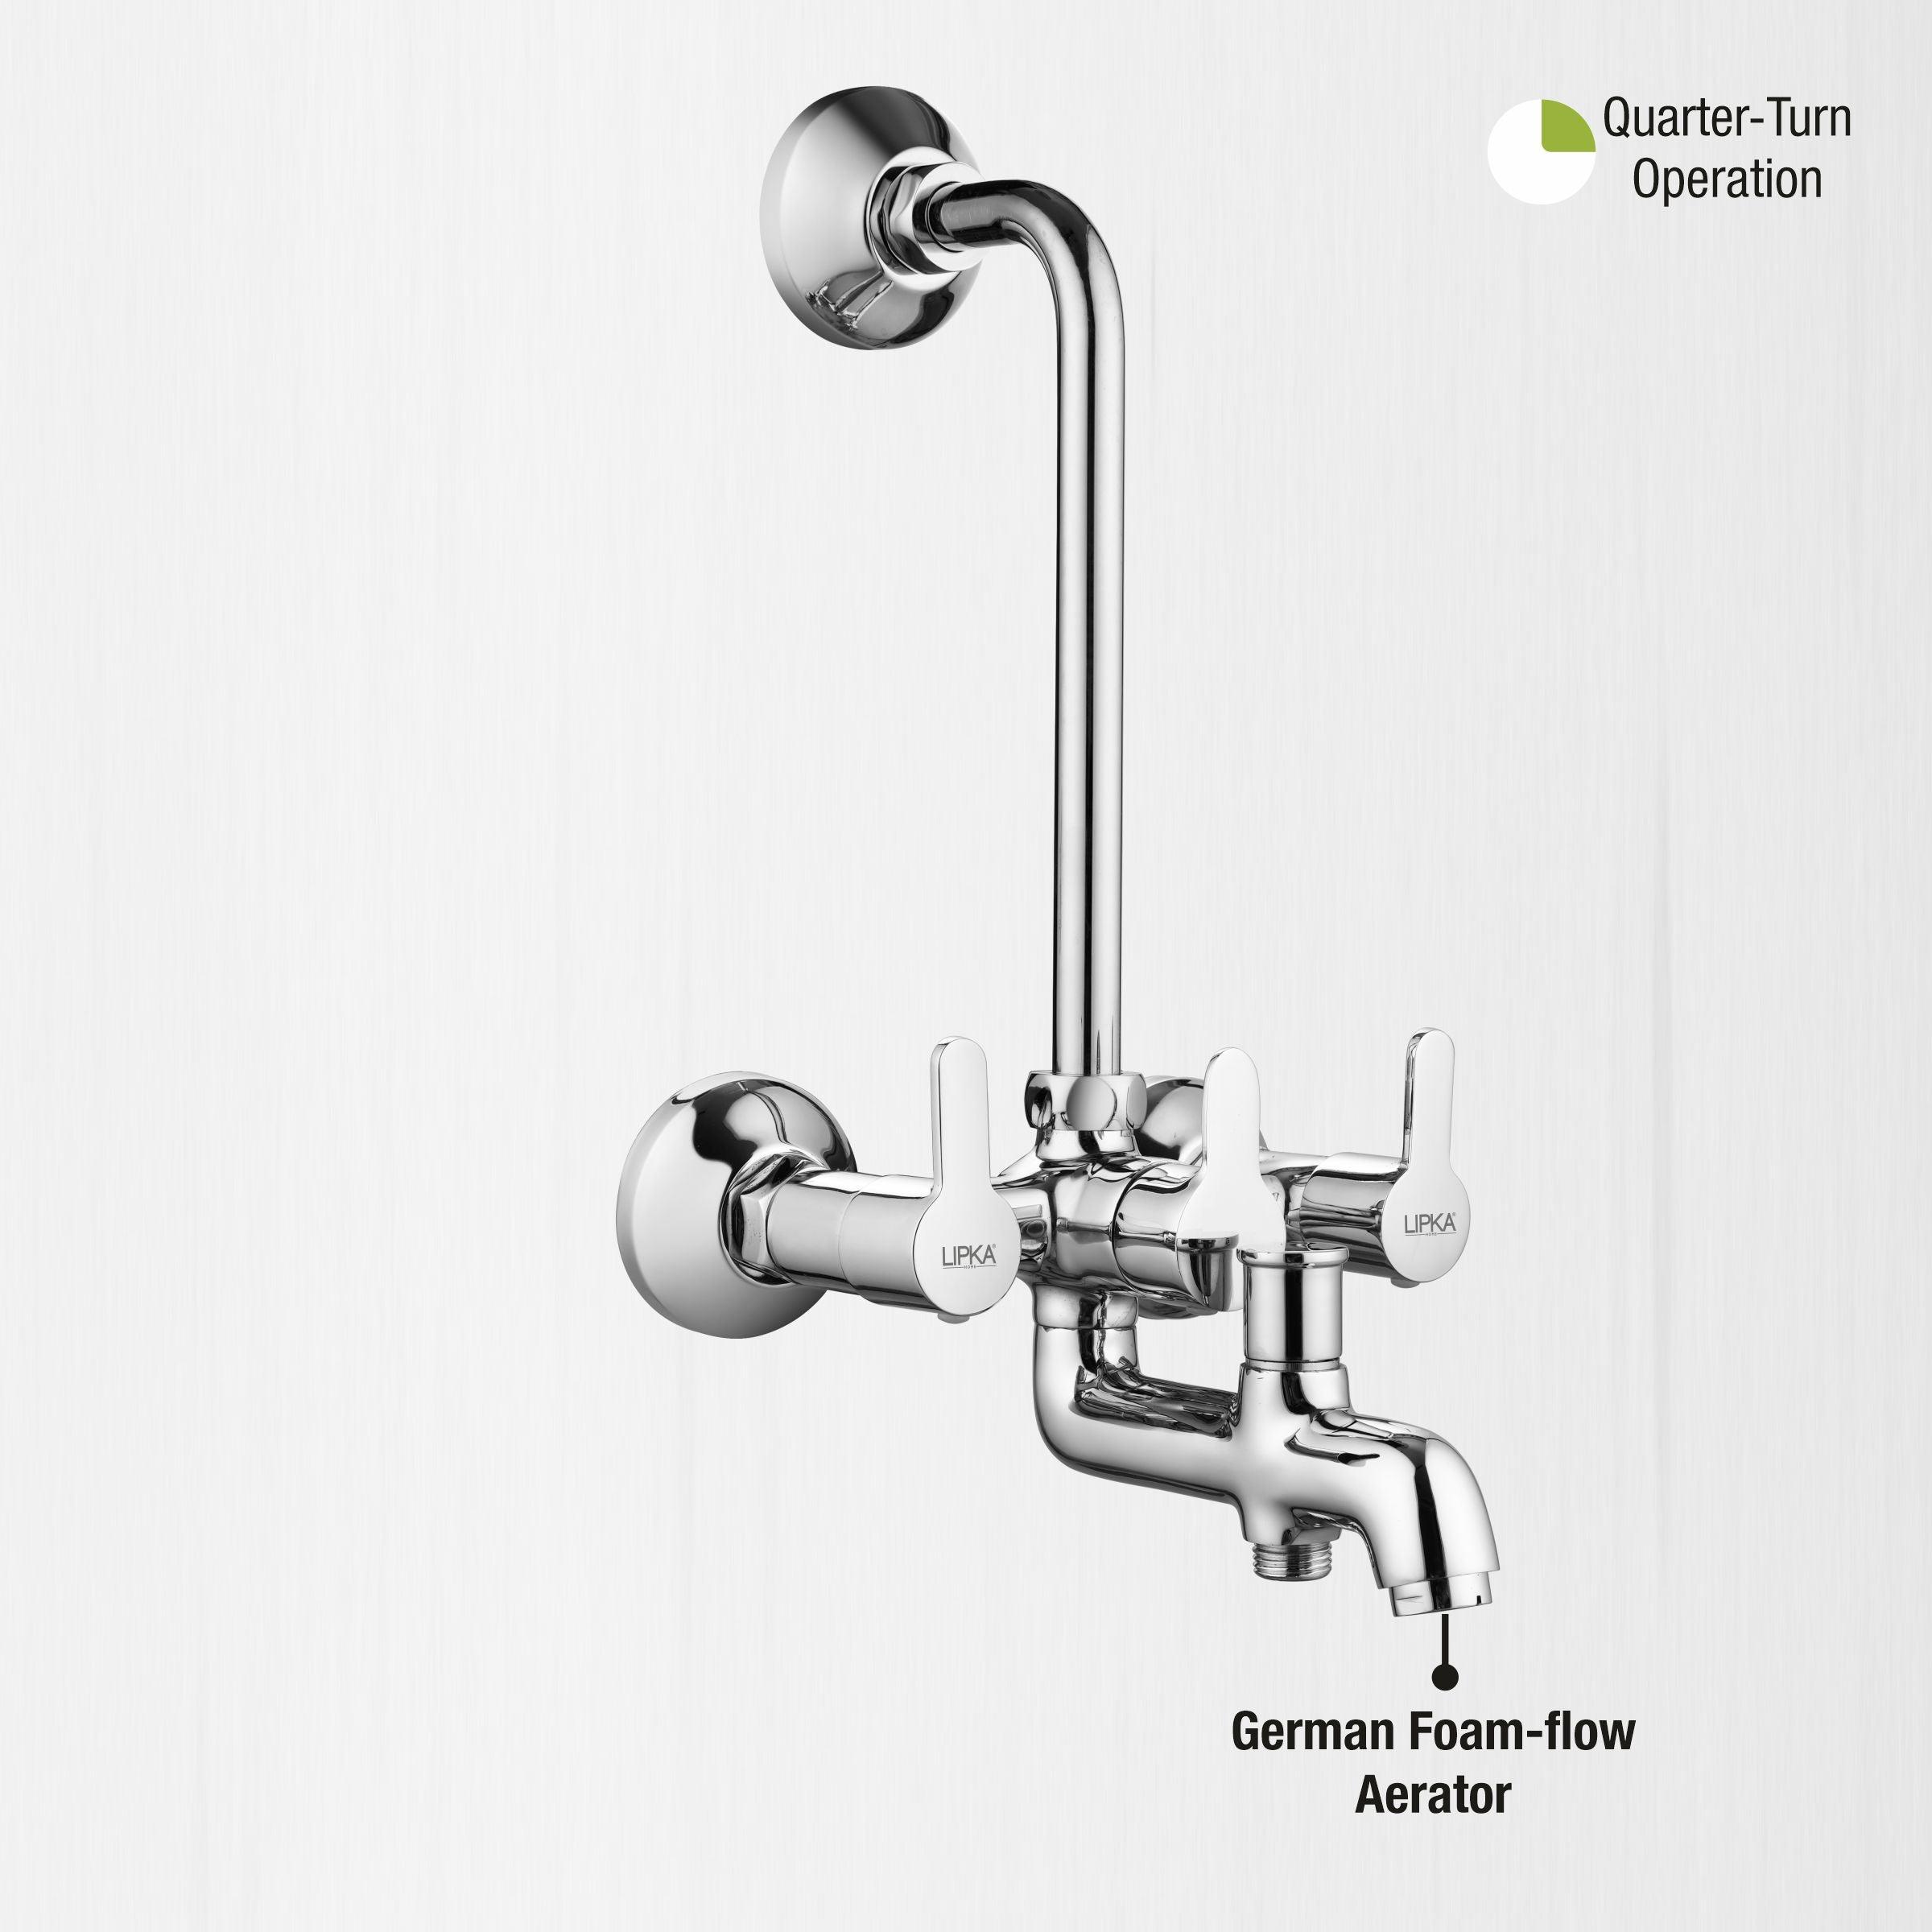 Fusion 3 in 1 Wall Mixer Brass Faucet with L Bend - LIPKA - Lipka Home